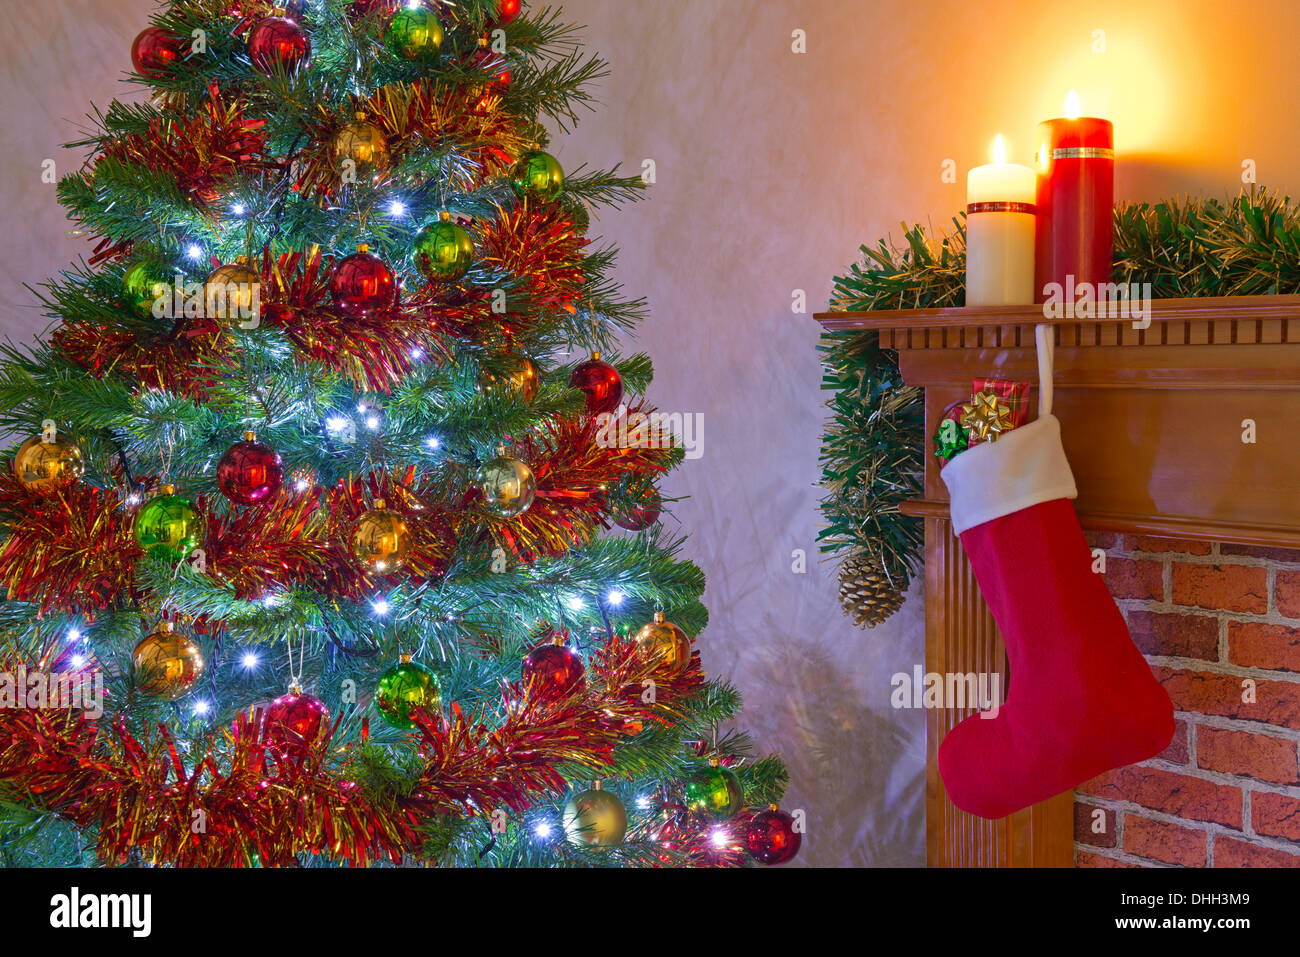 Christmas Eve with presents in a stocking hanging over the fireplace on the mantlepiece Stock Photo